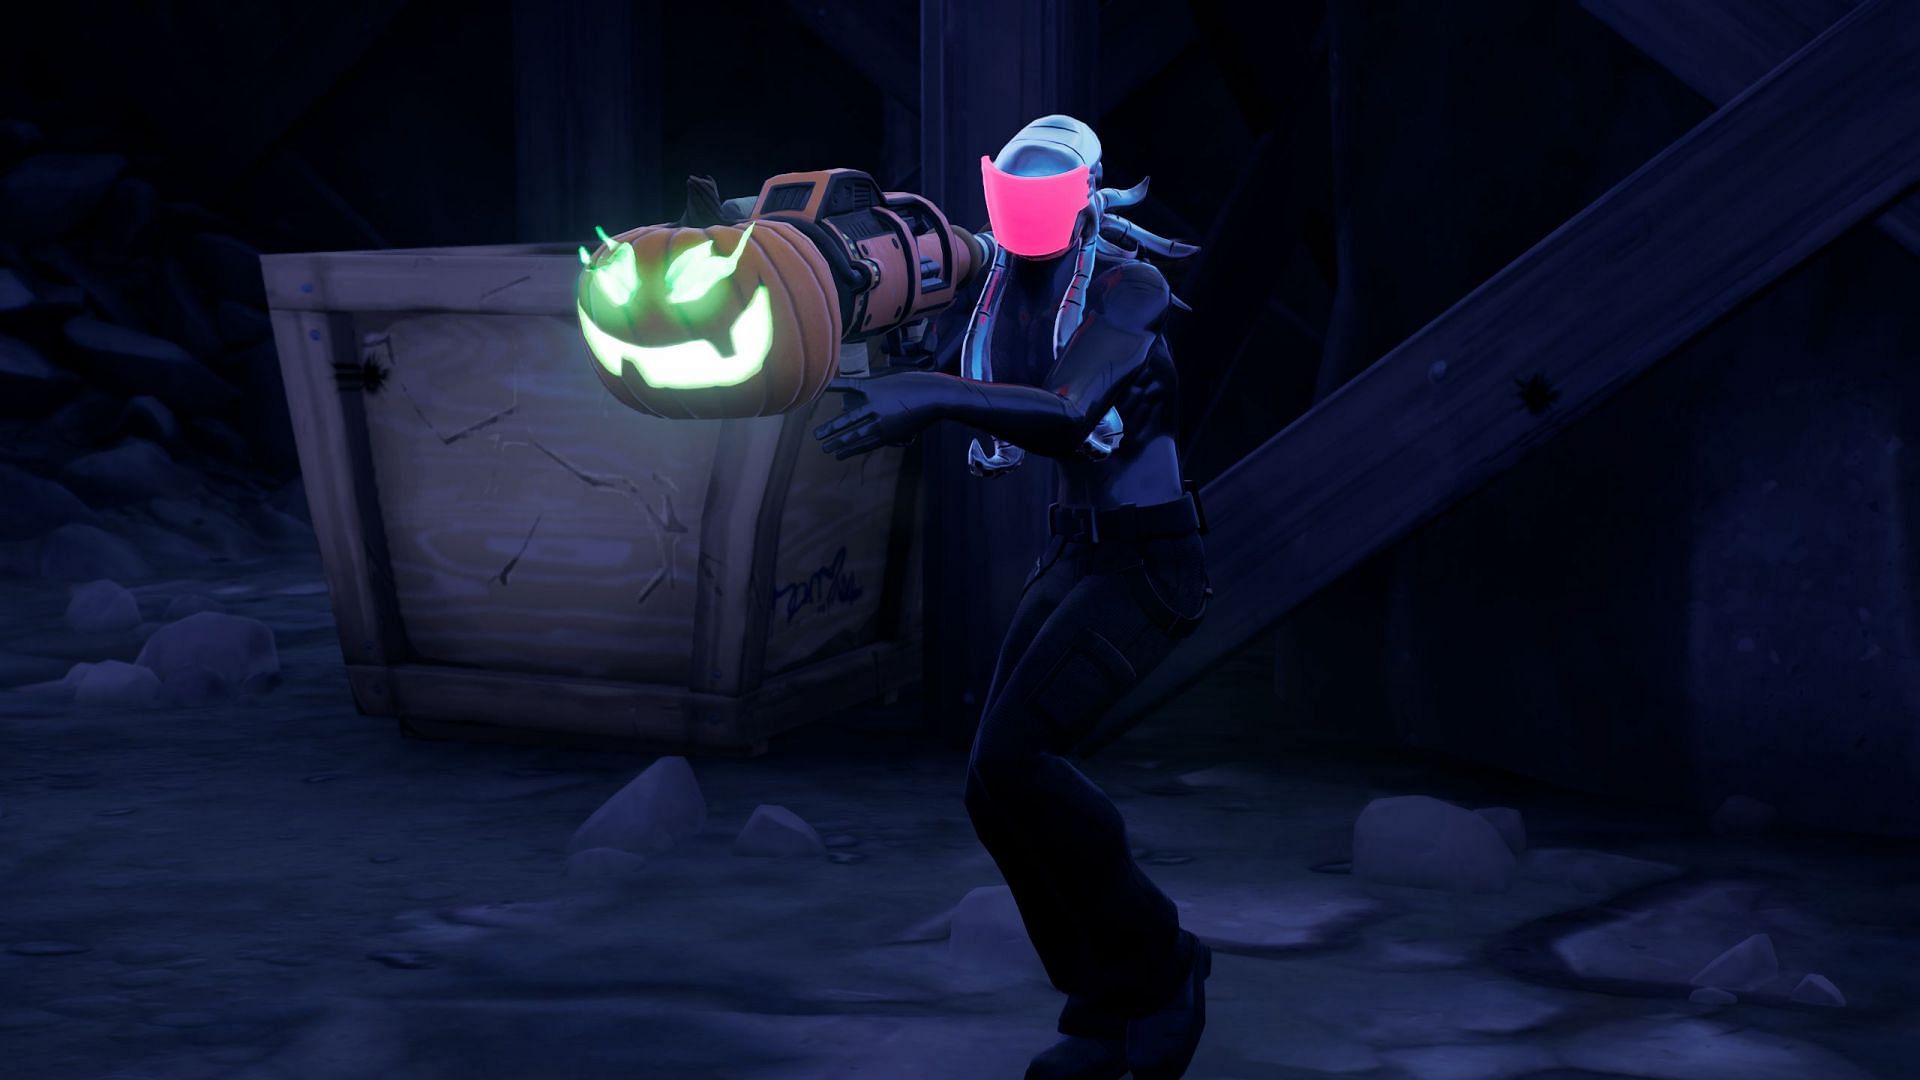 The new Fortnite boss uses the Pumpkin Launcher during the fight (Image via Epic Games)